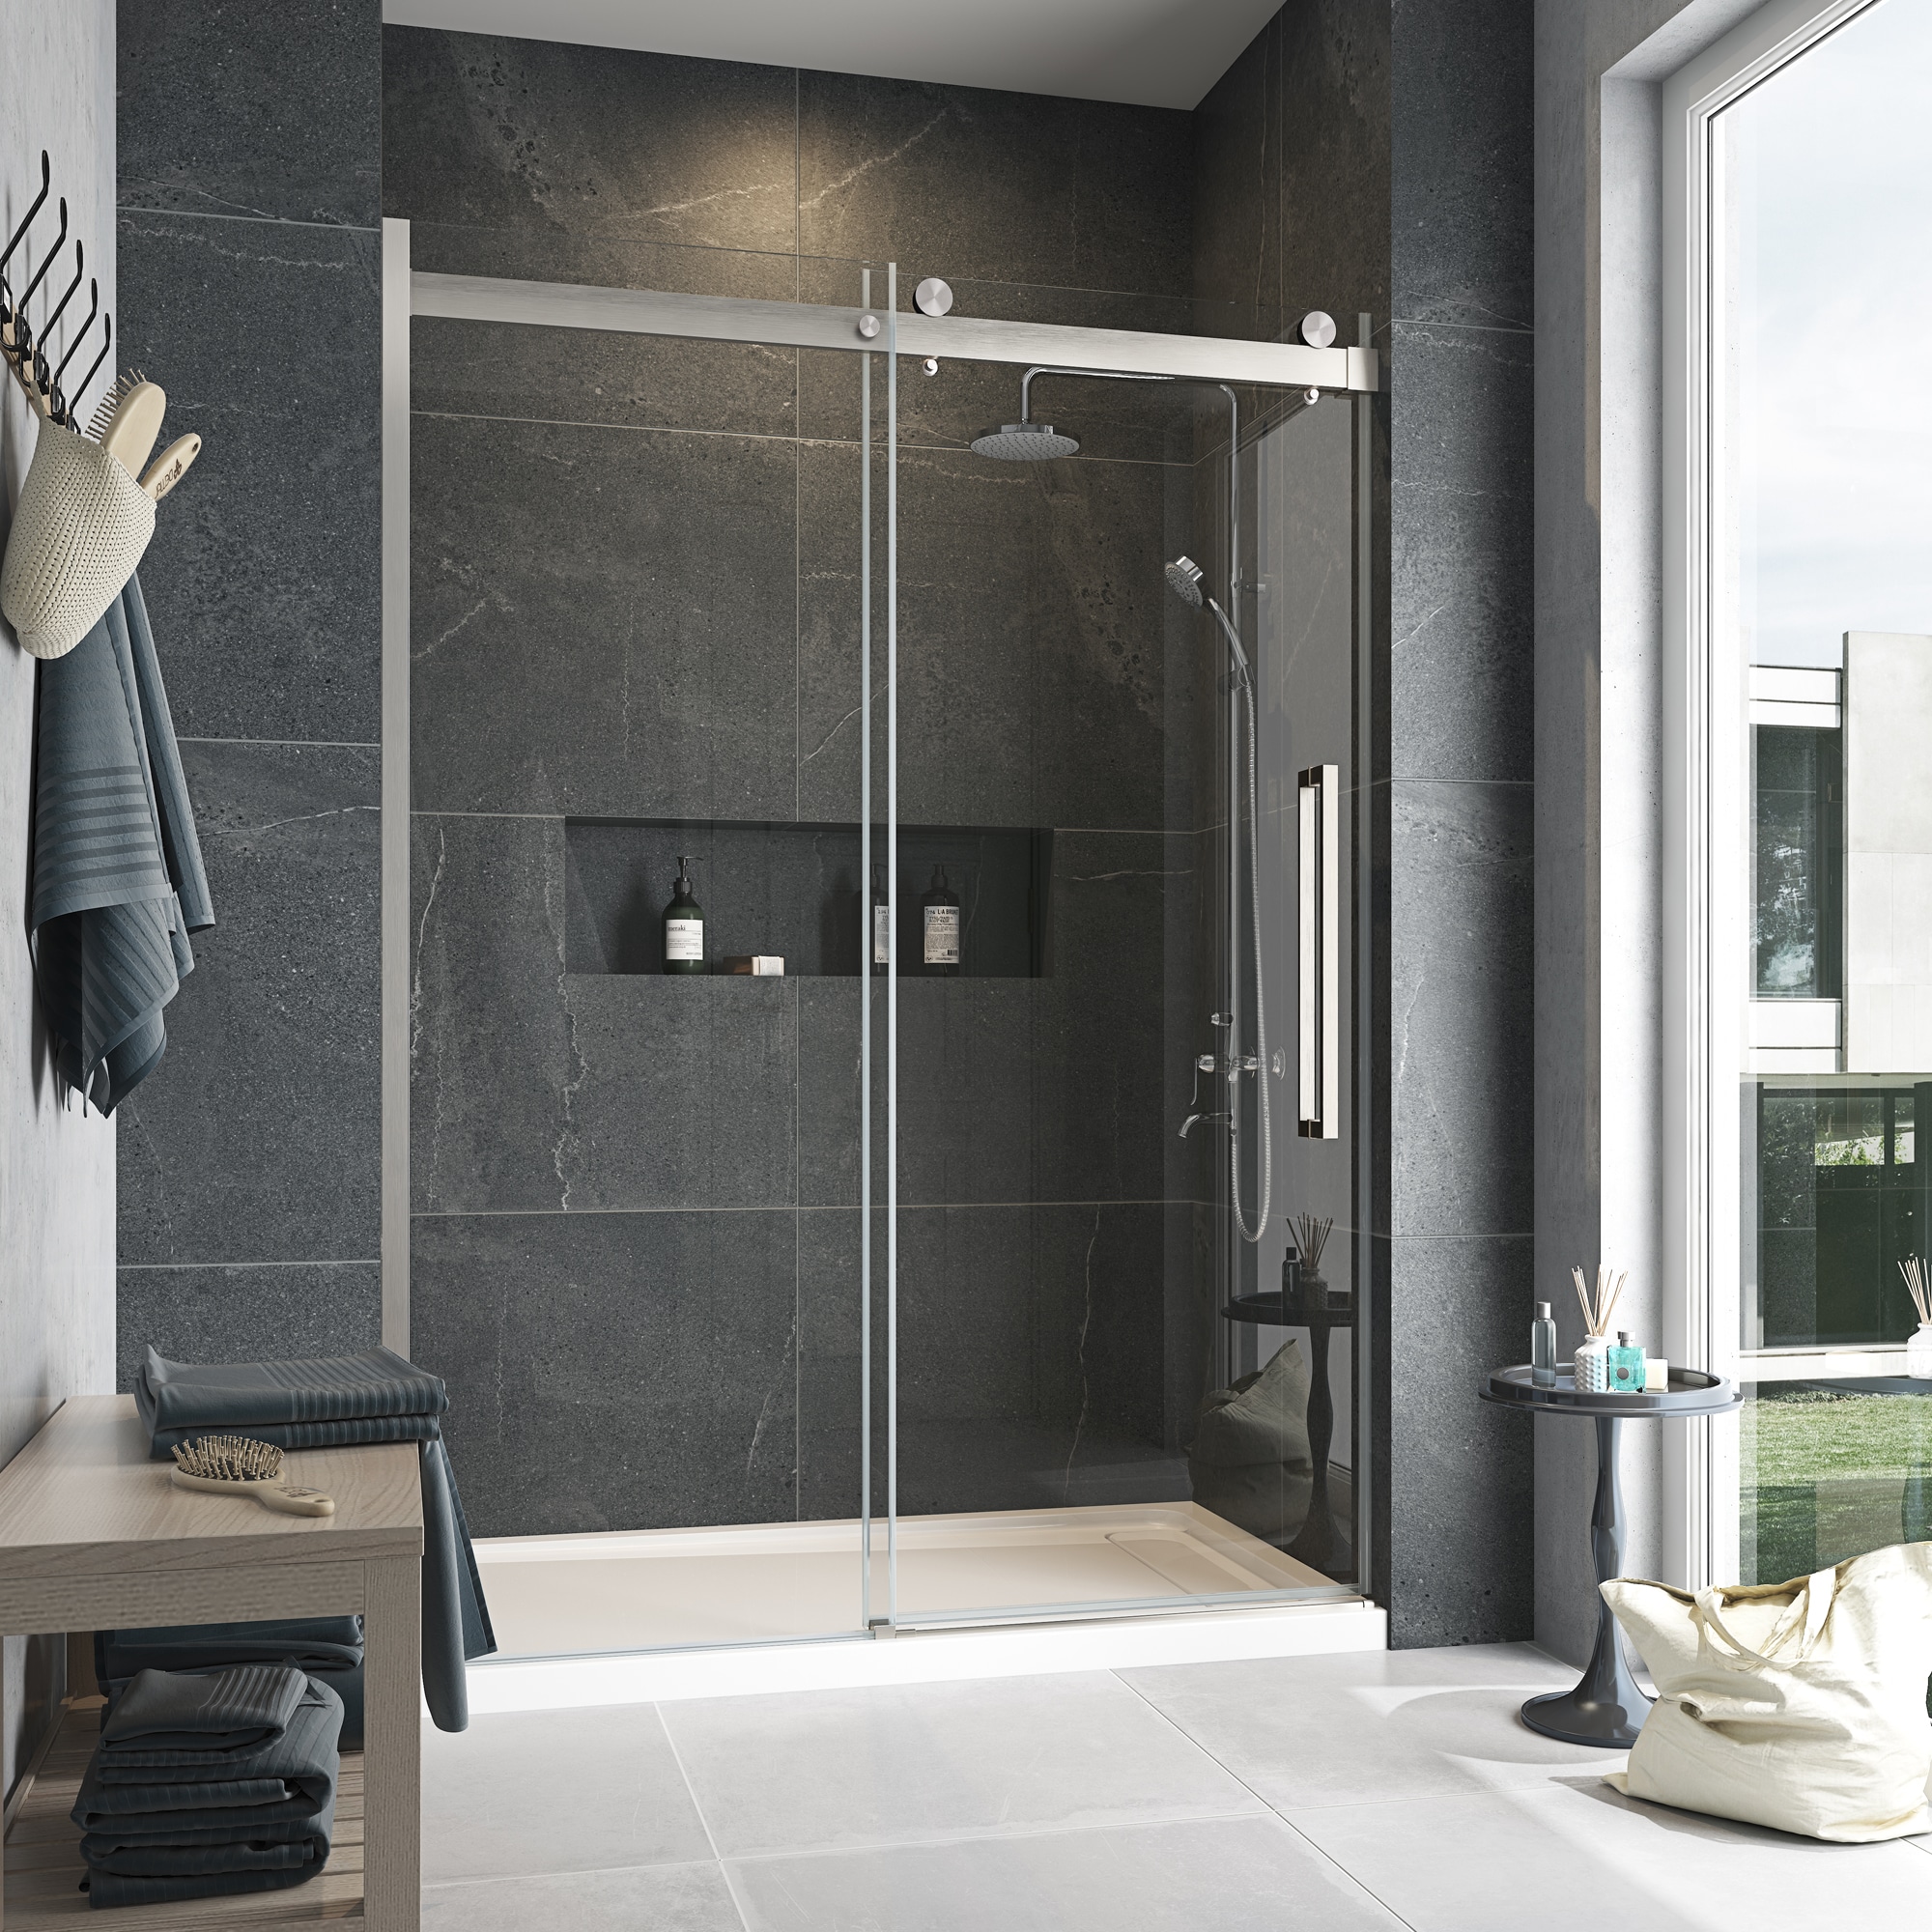 Soft-Close 60-in Frameless the Satin Doors Sliding 78.75-in Bel Door in at Soft Shower Decors Close OVE department Shower x to Nickel 58-in